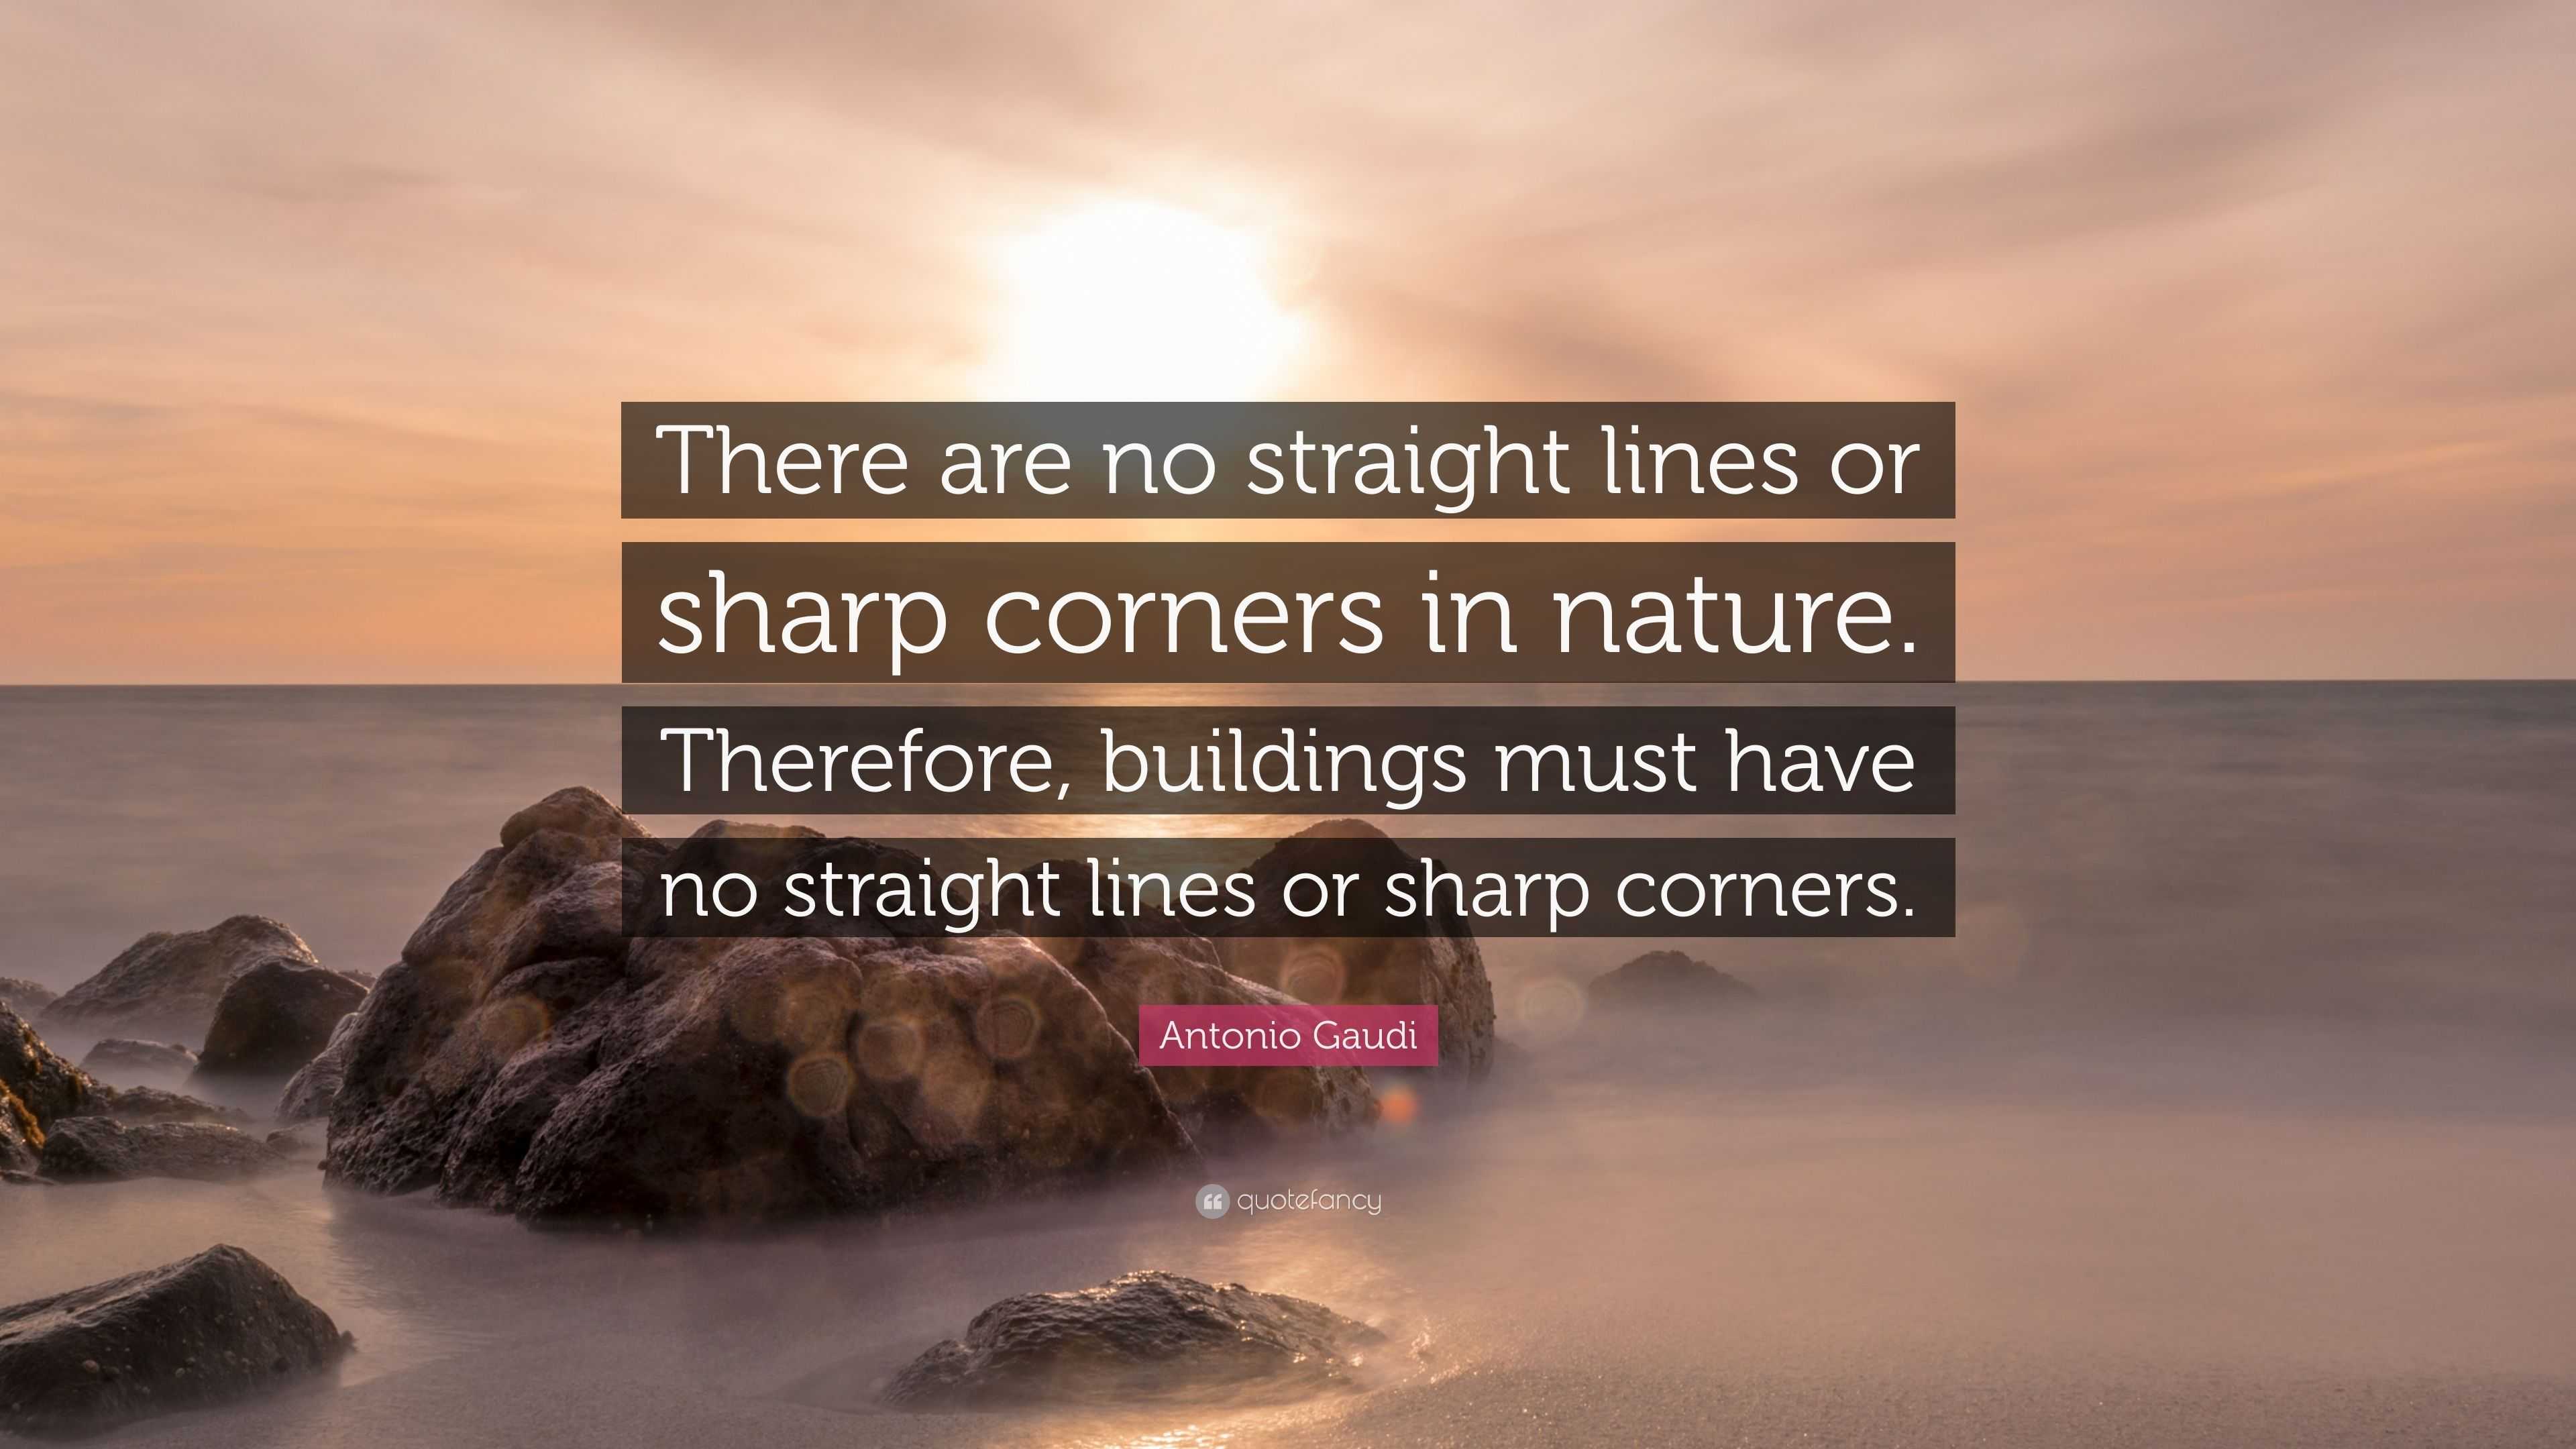 Antonio Gaudi Quote: “There are no straight lines or sharp corners in Therefore, buildings no straight lines or corner...”